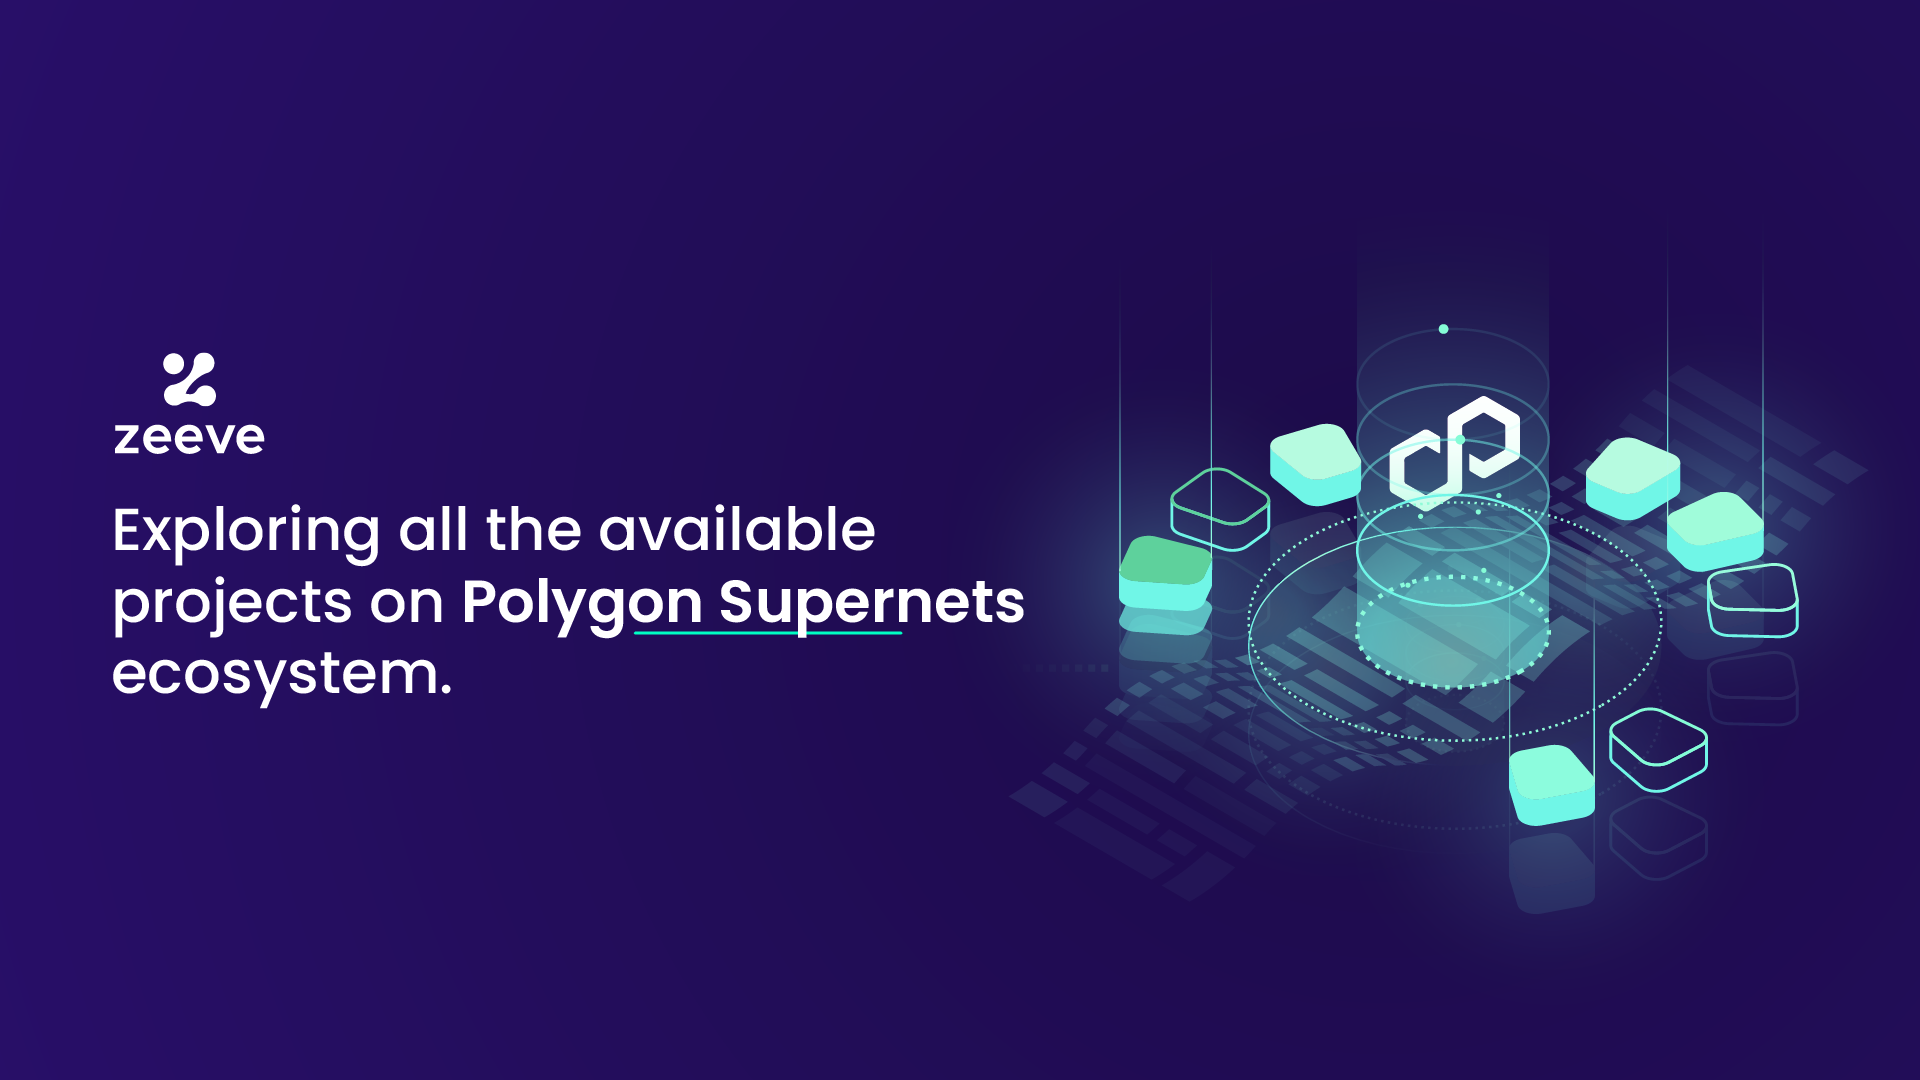 Polygon Supernets projects